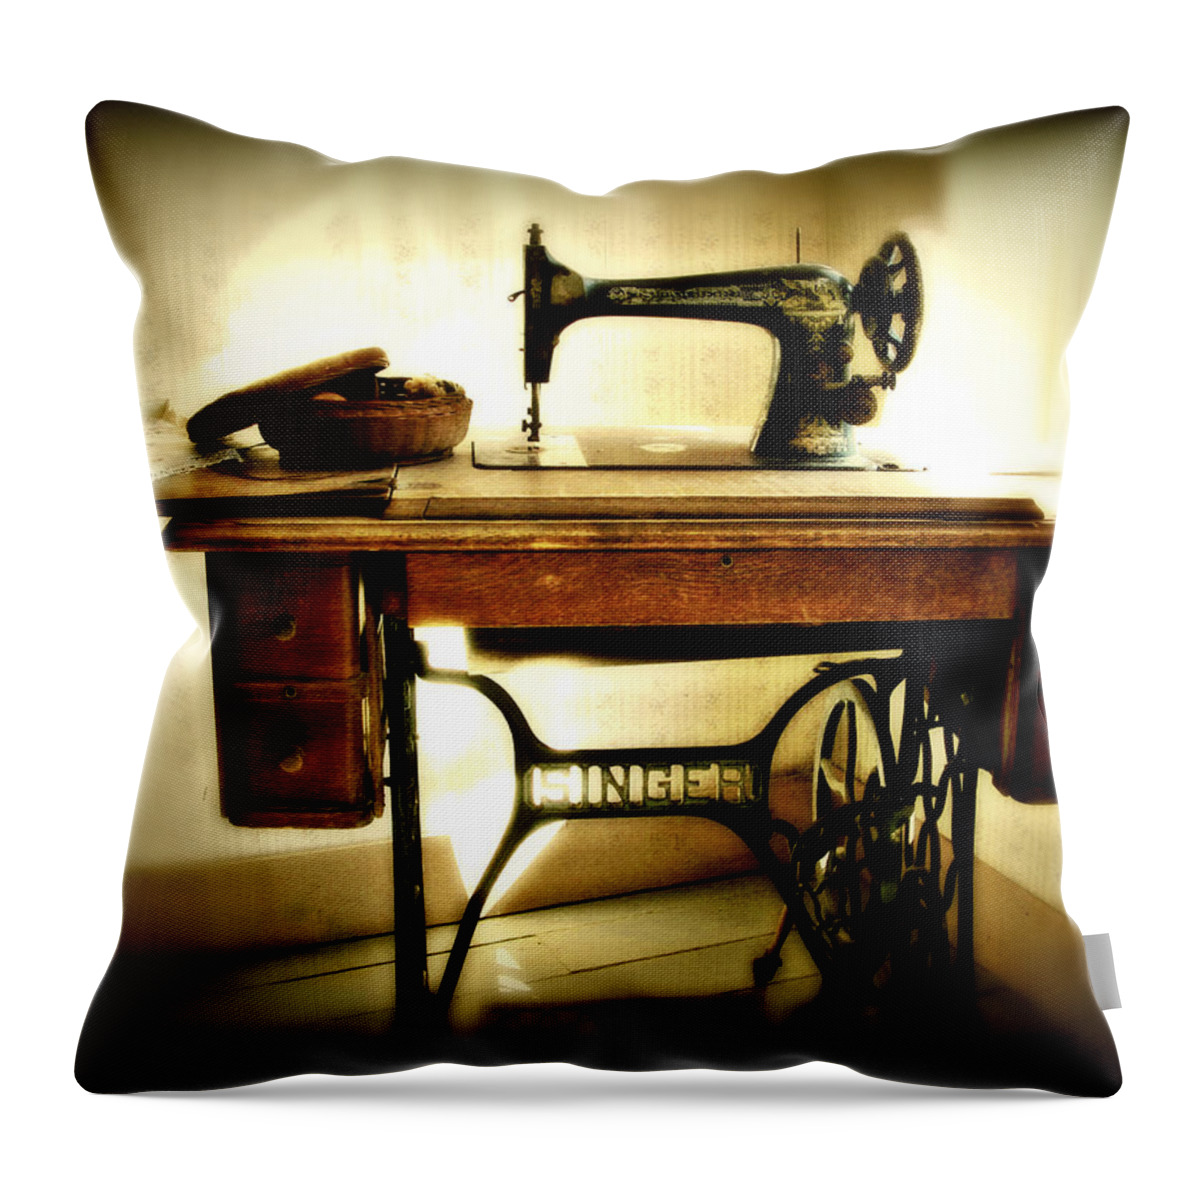 Singer Throw Pillow featuring the photograph Old Singer by Perry Webster